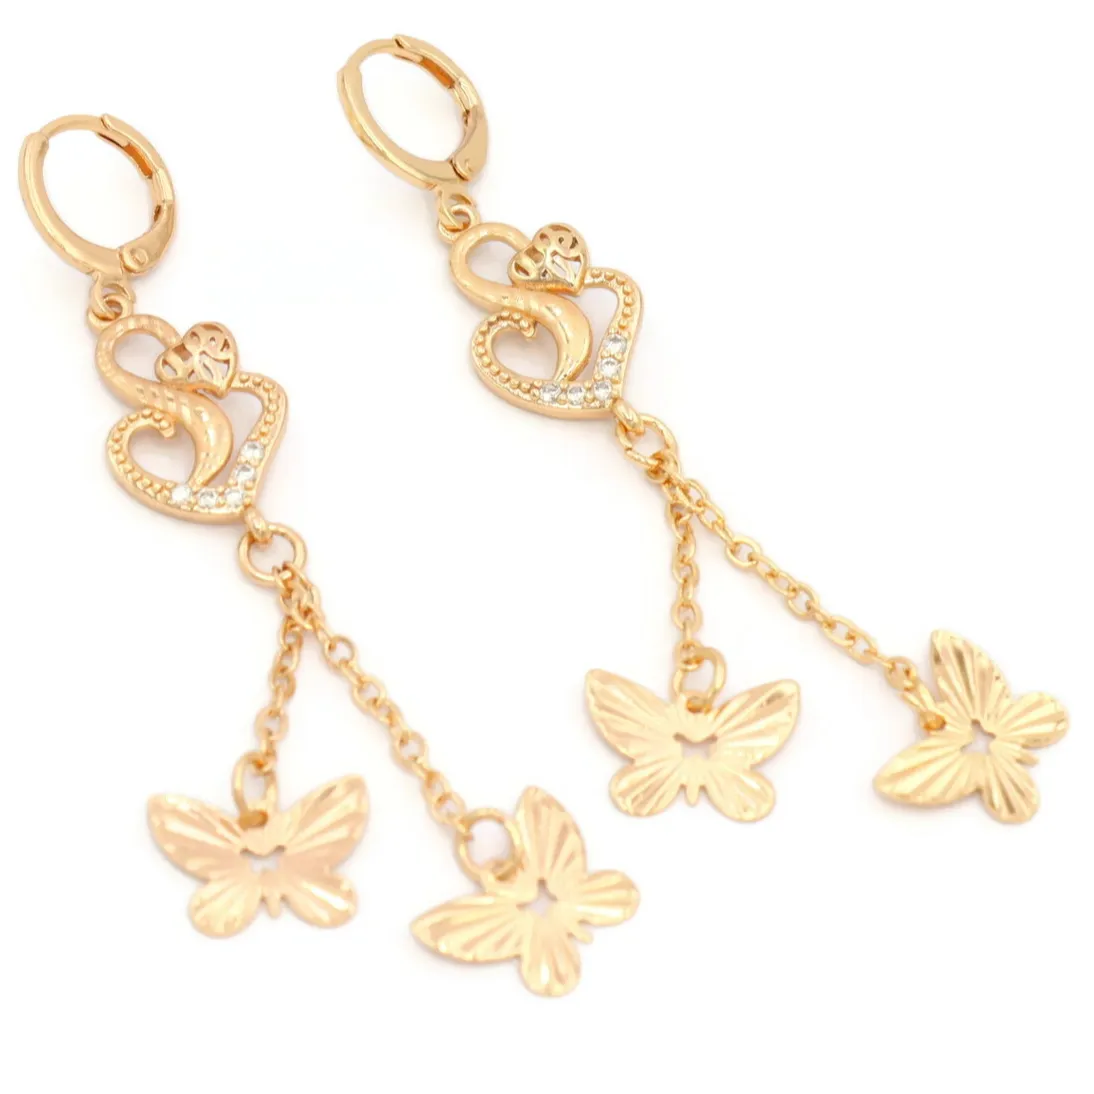 Charming Heart Design Laser Printed American Diamond Butterfly Design Hanging Rose Gold Plated Long Earring